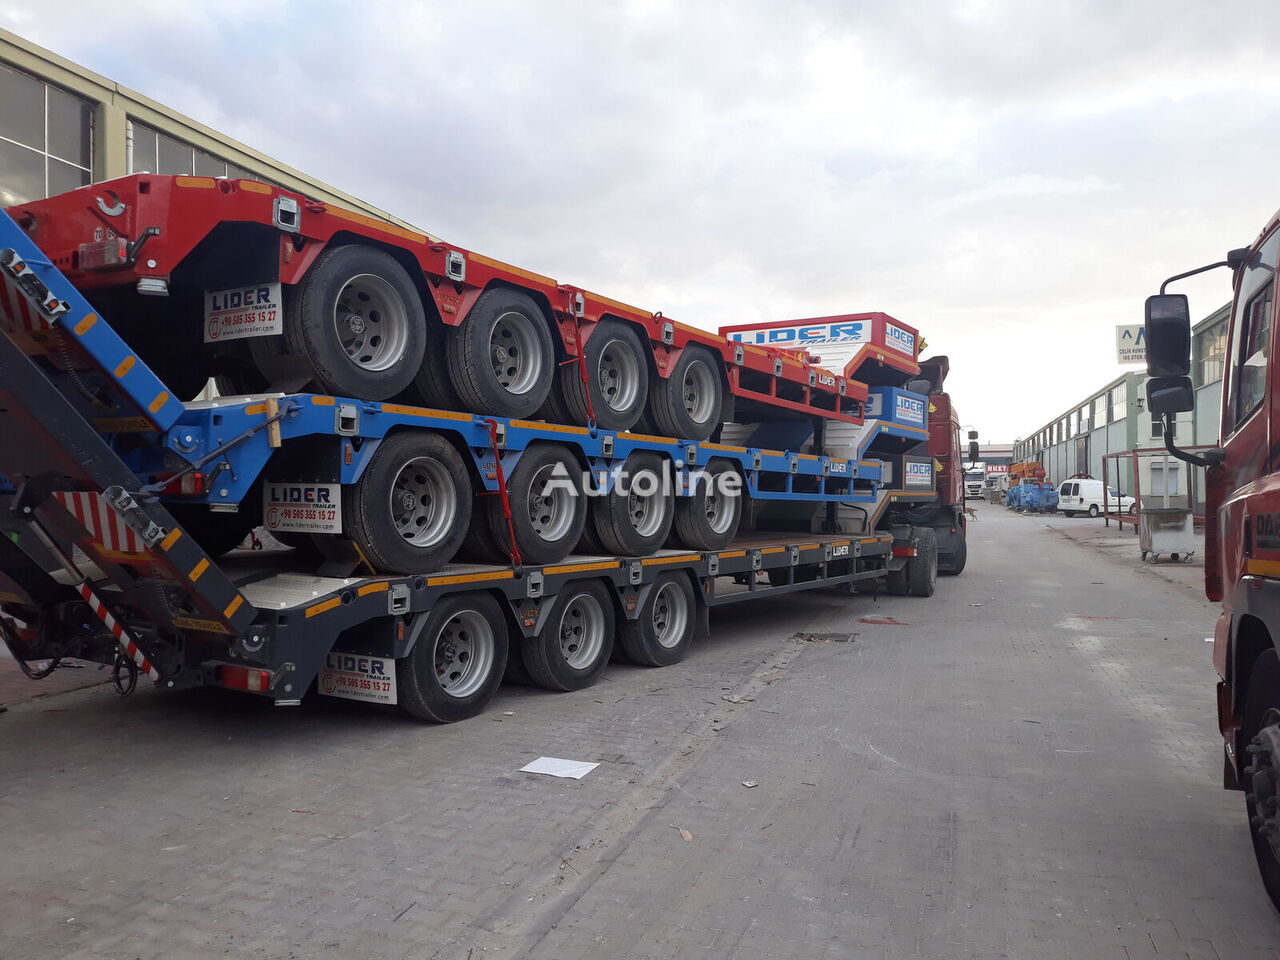 Leasing LIDER 2022 NEW from manufacturer READY IN STOCK LIDER 2022 NEW from manufacturer READY IN STOCK: kuva Leasing LIDER 2022 NEW from manufacturer READY IN STOCK LIDER 2022 NEW from manufacturer READY IN STOCK